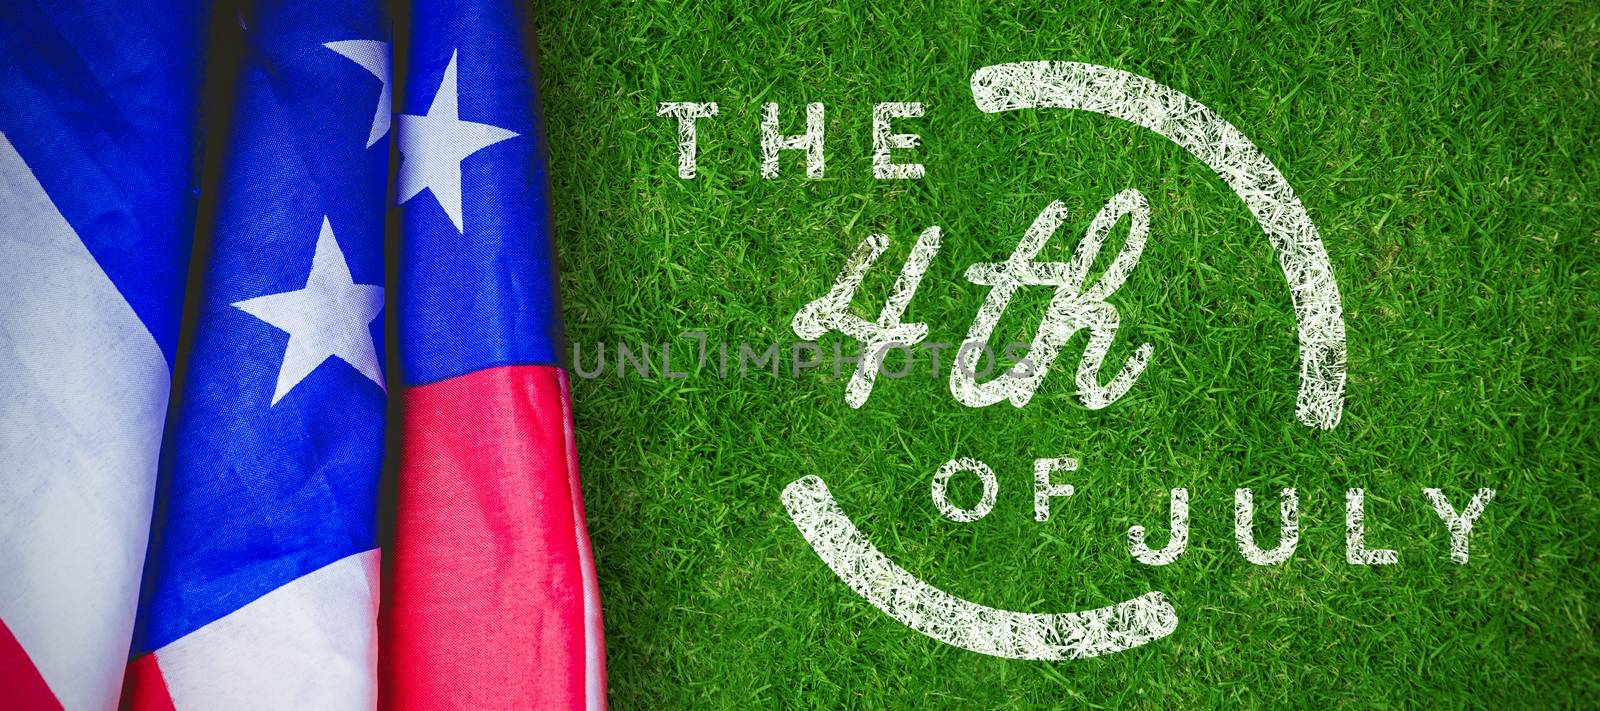 Colorful happy 4th of july text against white background against closed up view of grass